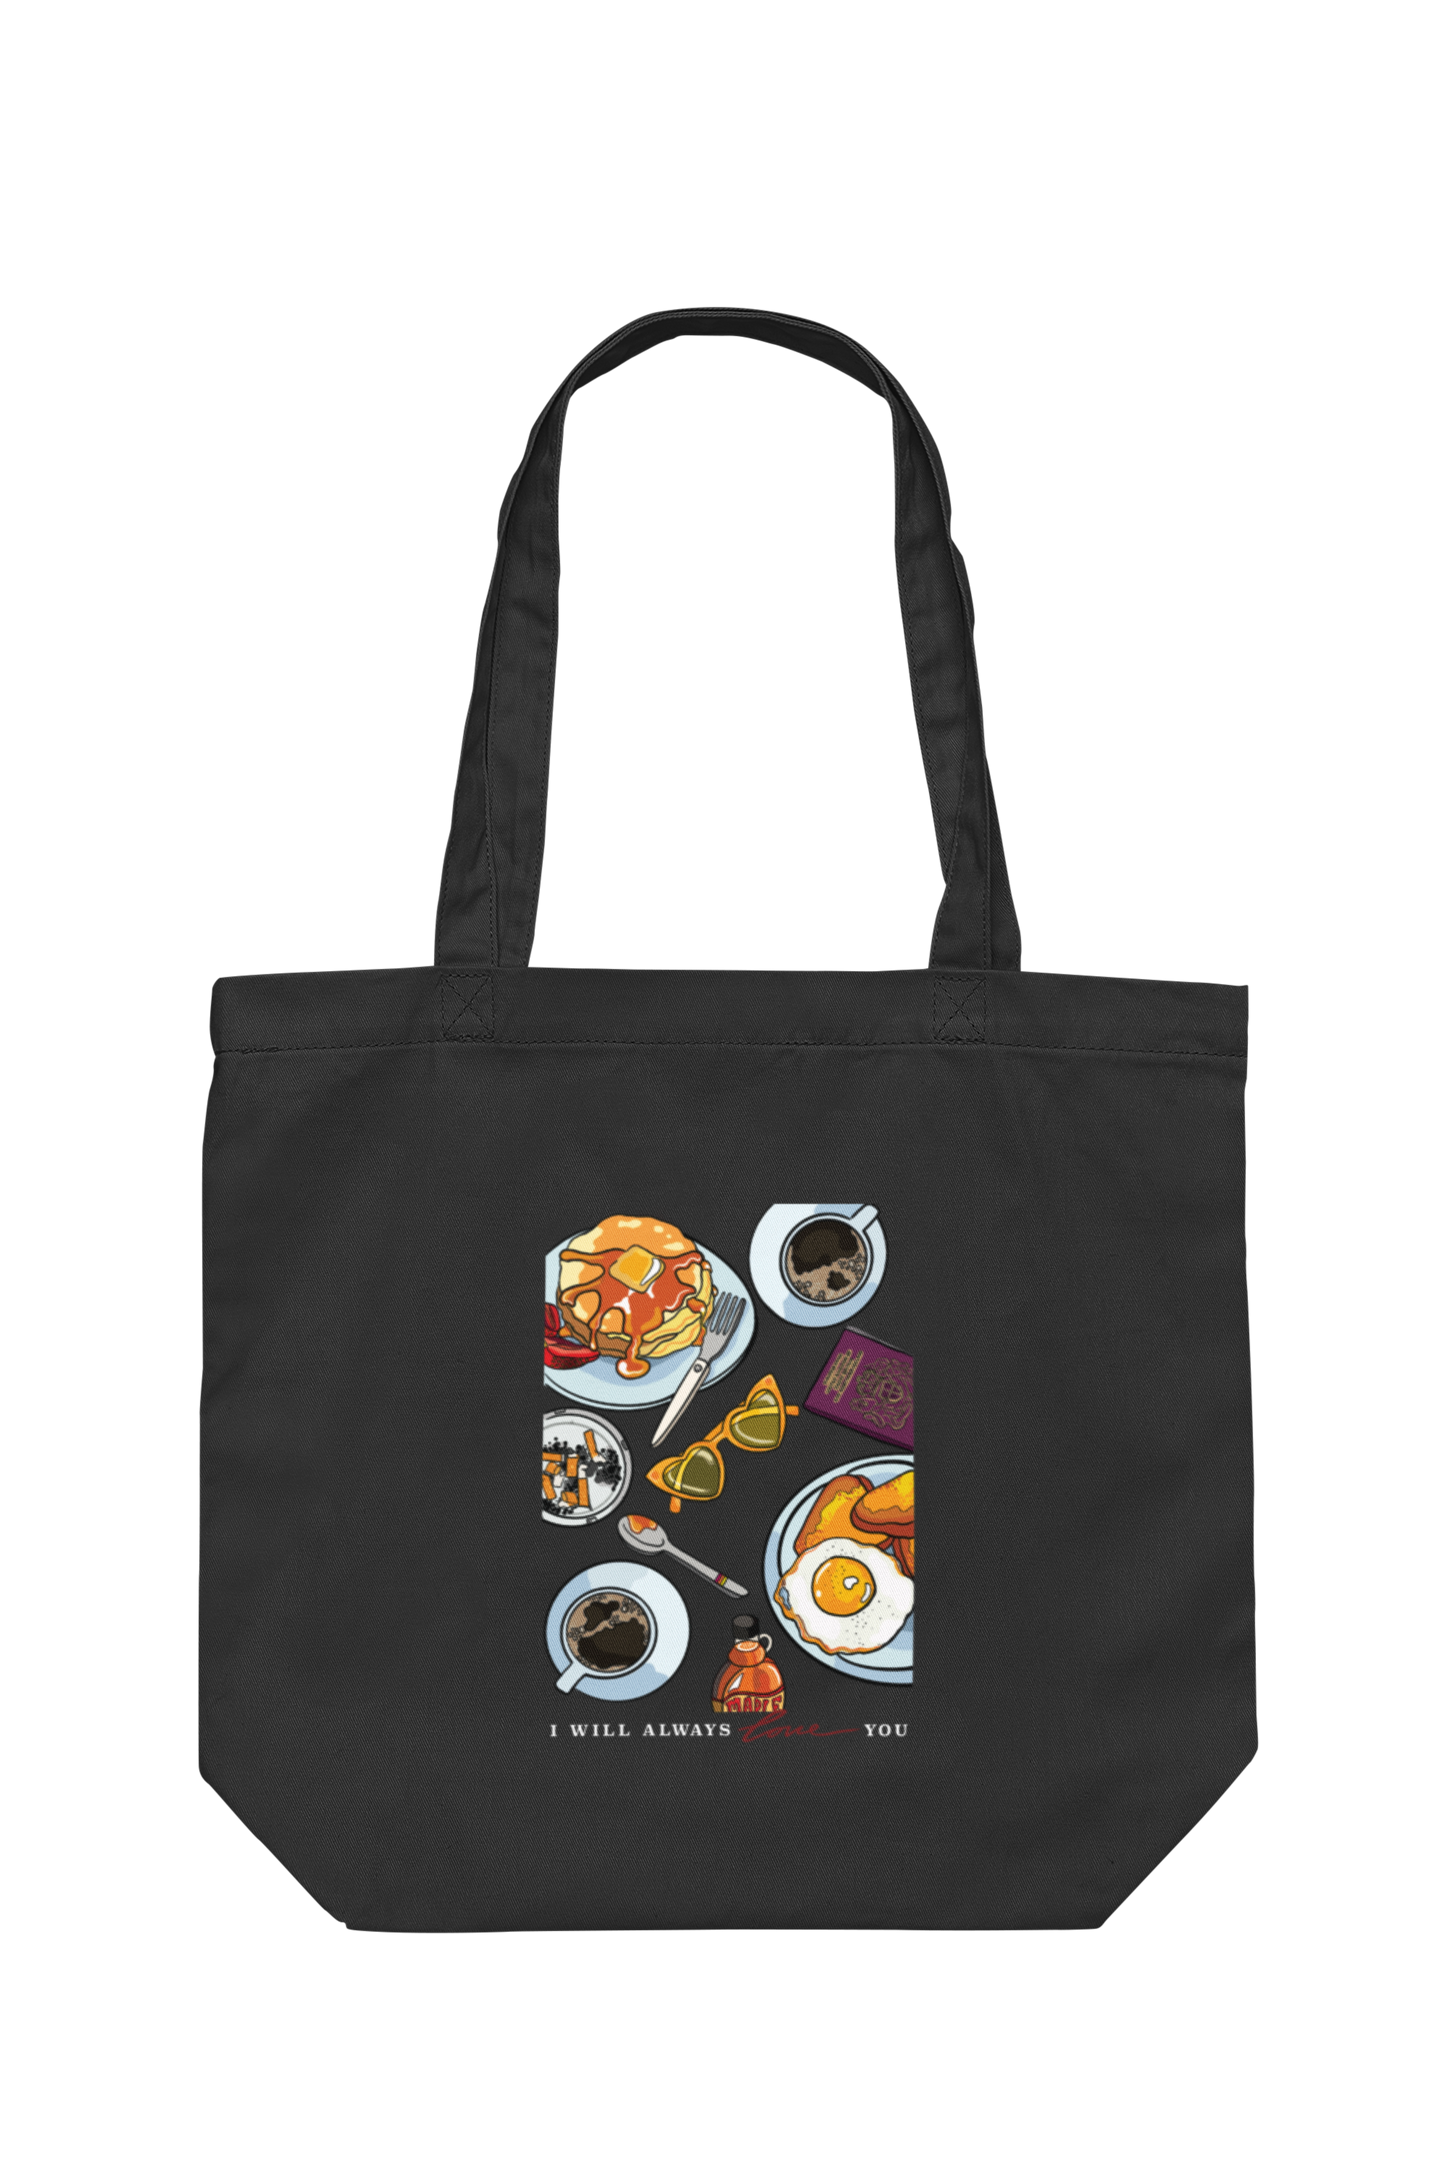 Harry Styles - I Will Always Love You Tote Bag